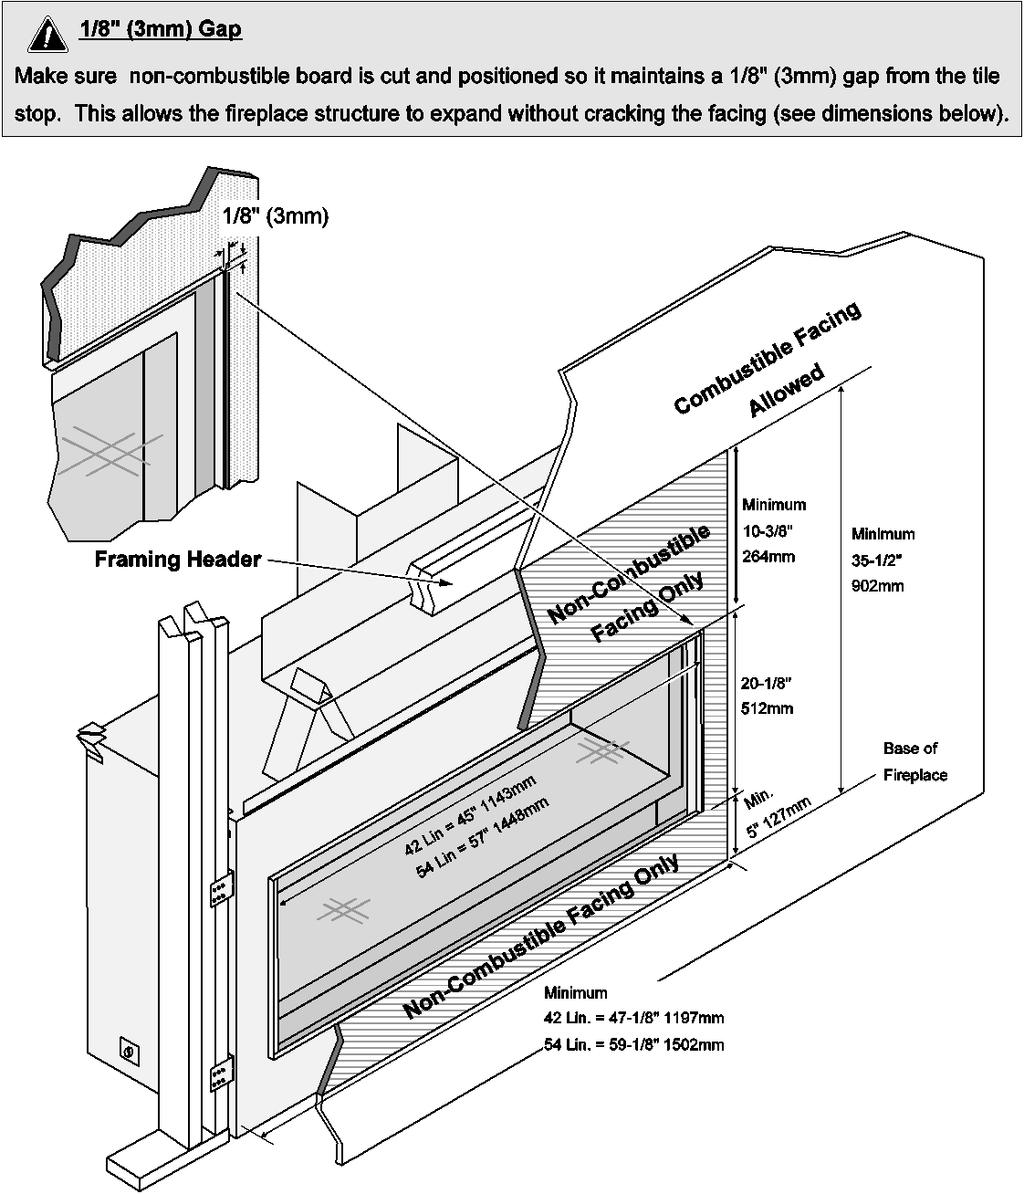 Drywall (or other combustible) may be placed above the non-combustible facing (35-1/2 above the base of the fireplace).